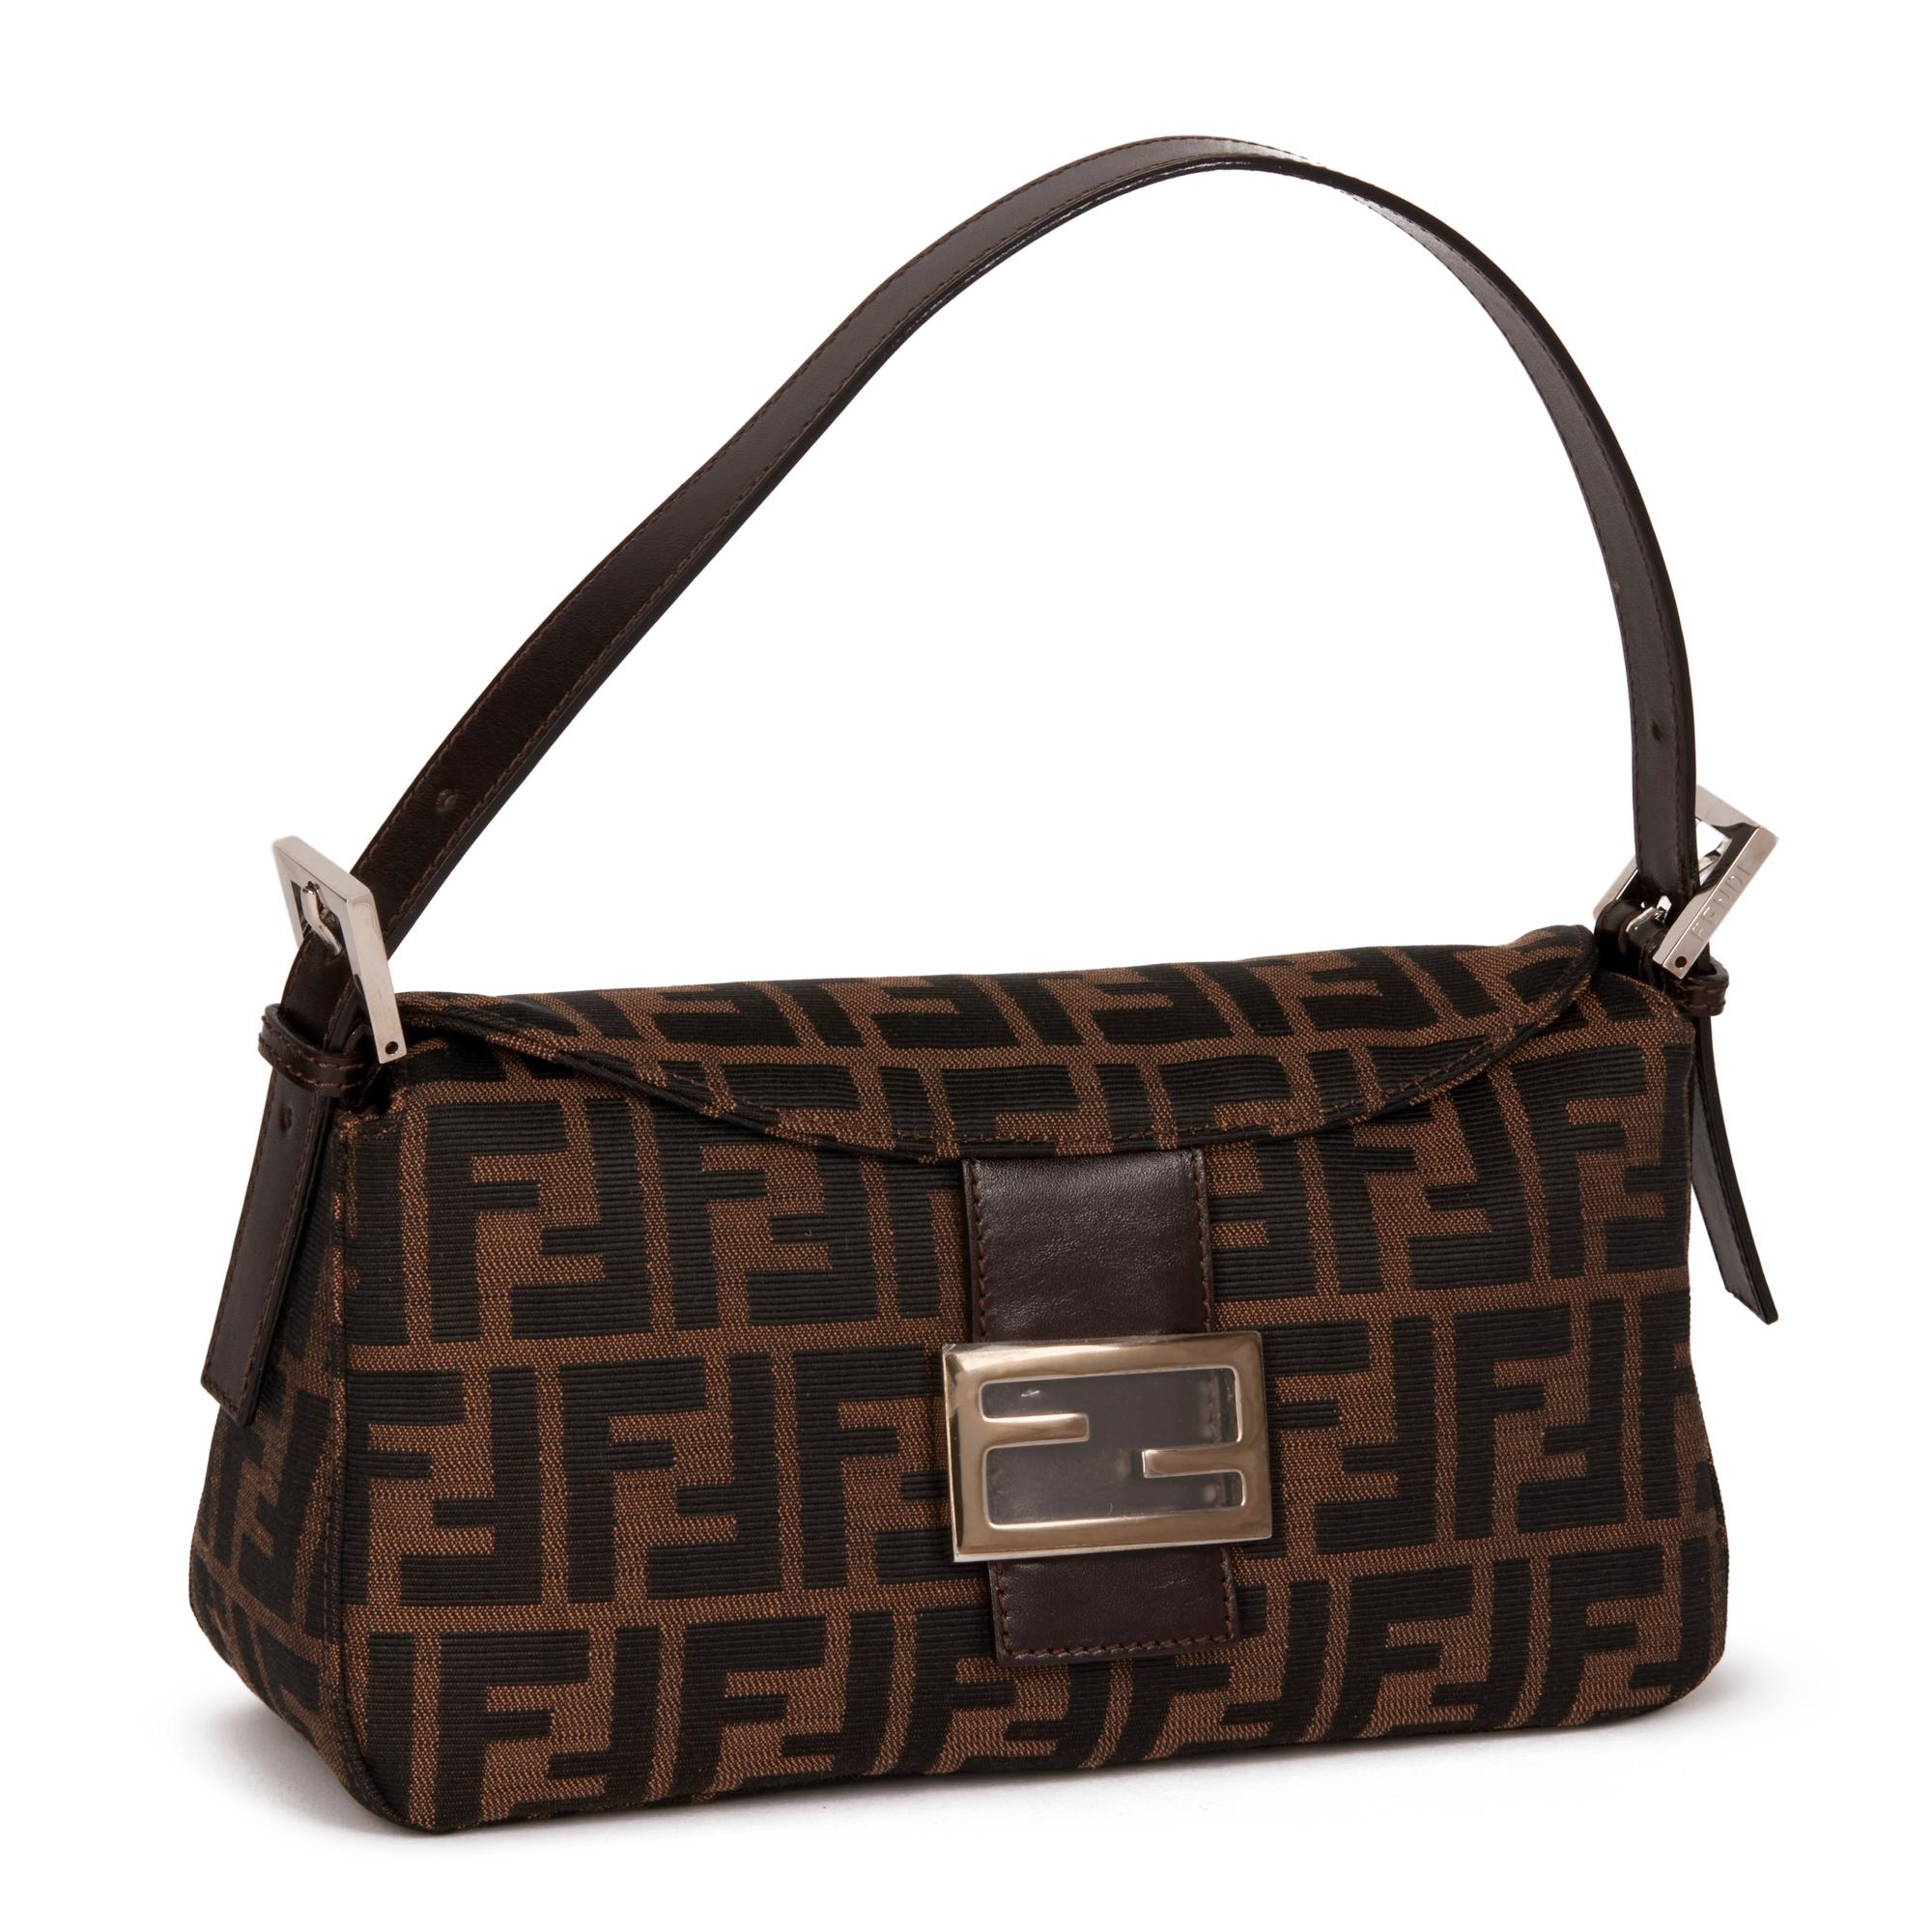 FENDI
Brown Zucca Canvas & Calfskin Leather Vintage Pochette Baguette

Xupes Reference: HB4366
Serial Number: 2348-26725-008q
Age (Circa): 2000
Accompanied By: Fendi Dust Bag
Authenticity Details: Date Stamp (Made in Italy)
Gender: Ladies
Type: